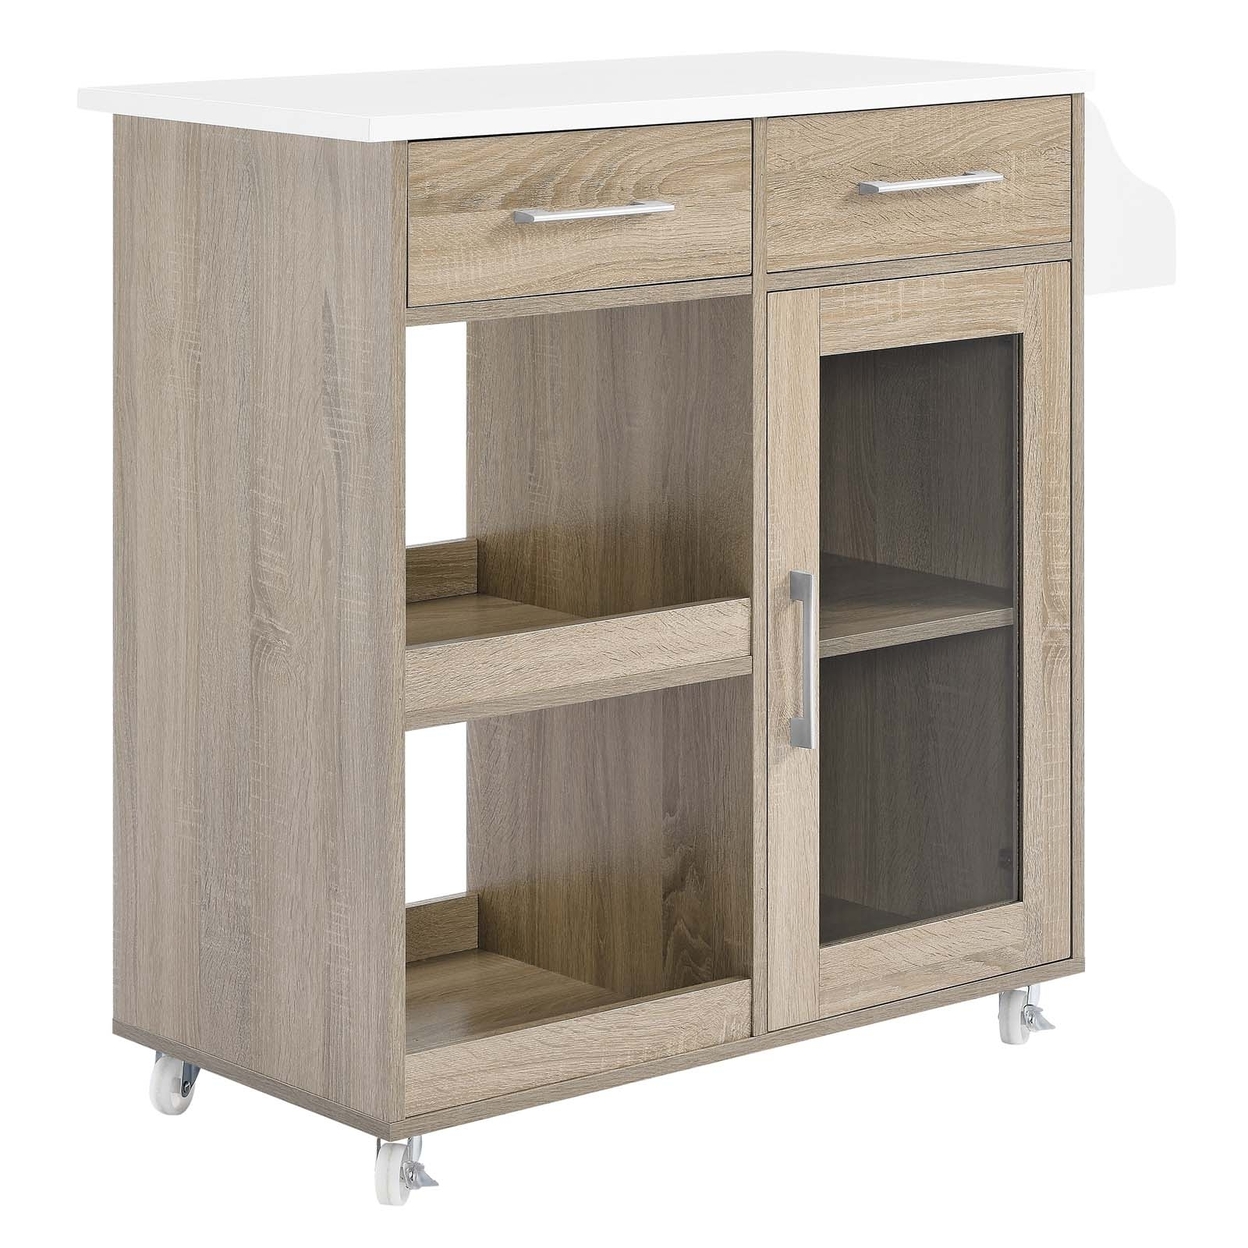 Culinary Kitchen Cart With Spice Rack, Oak White